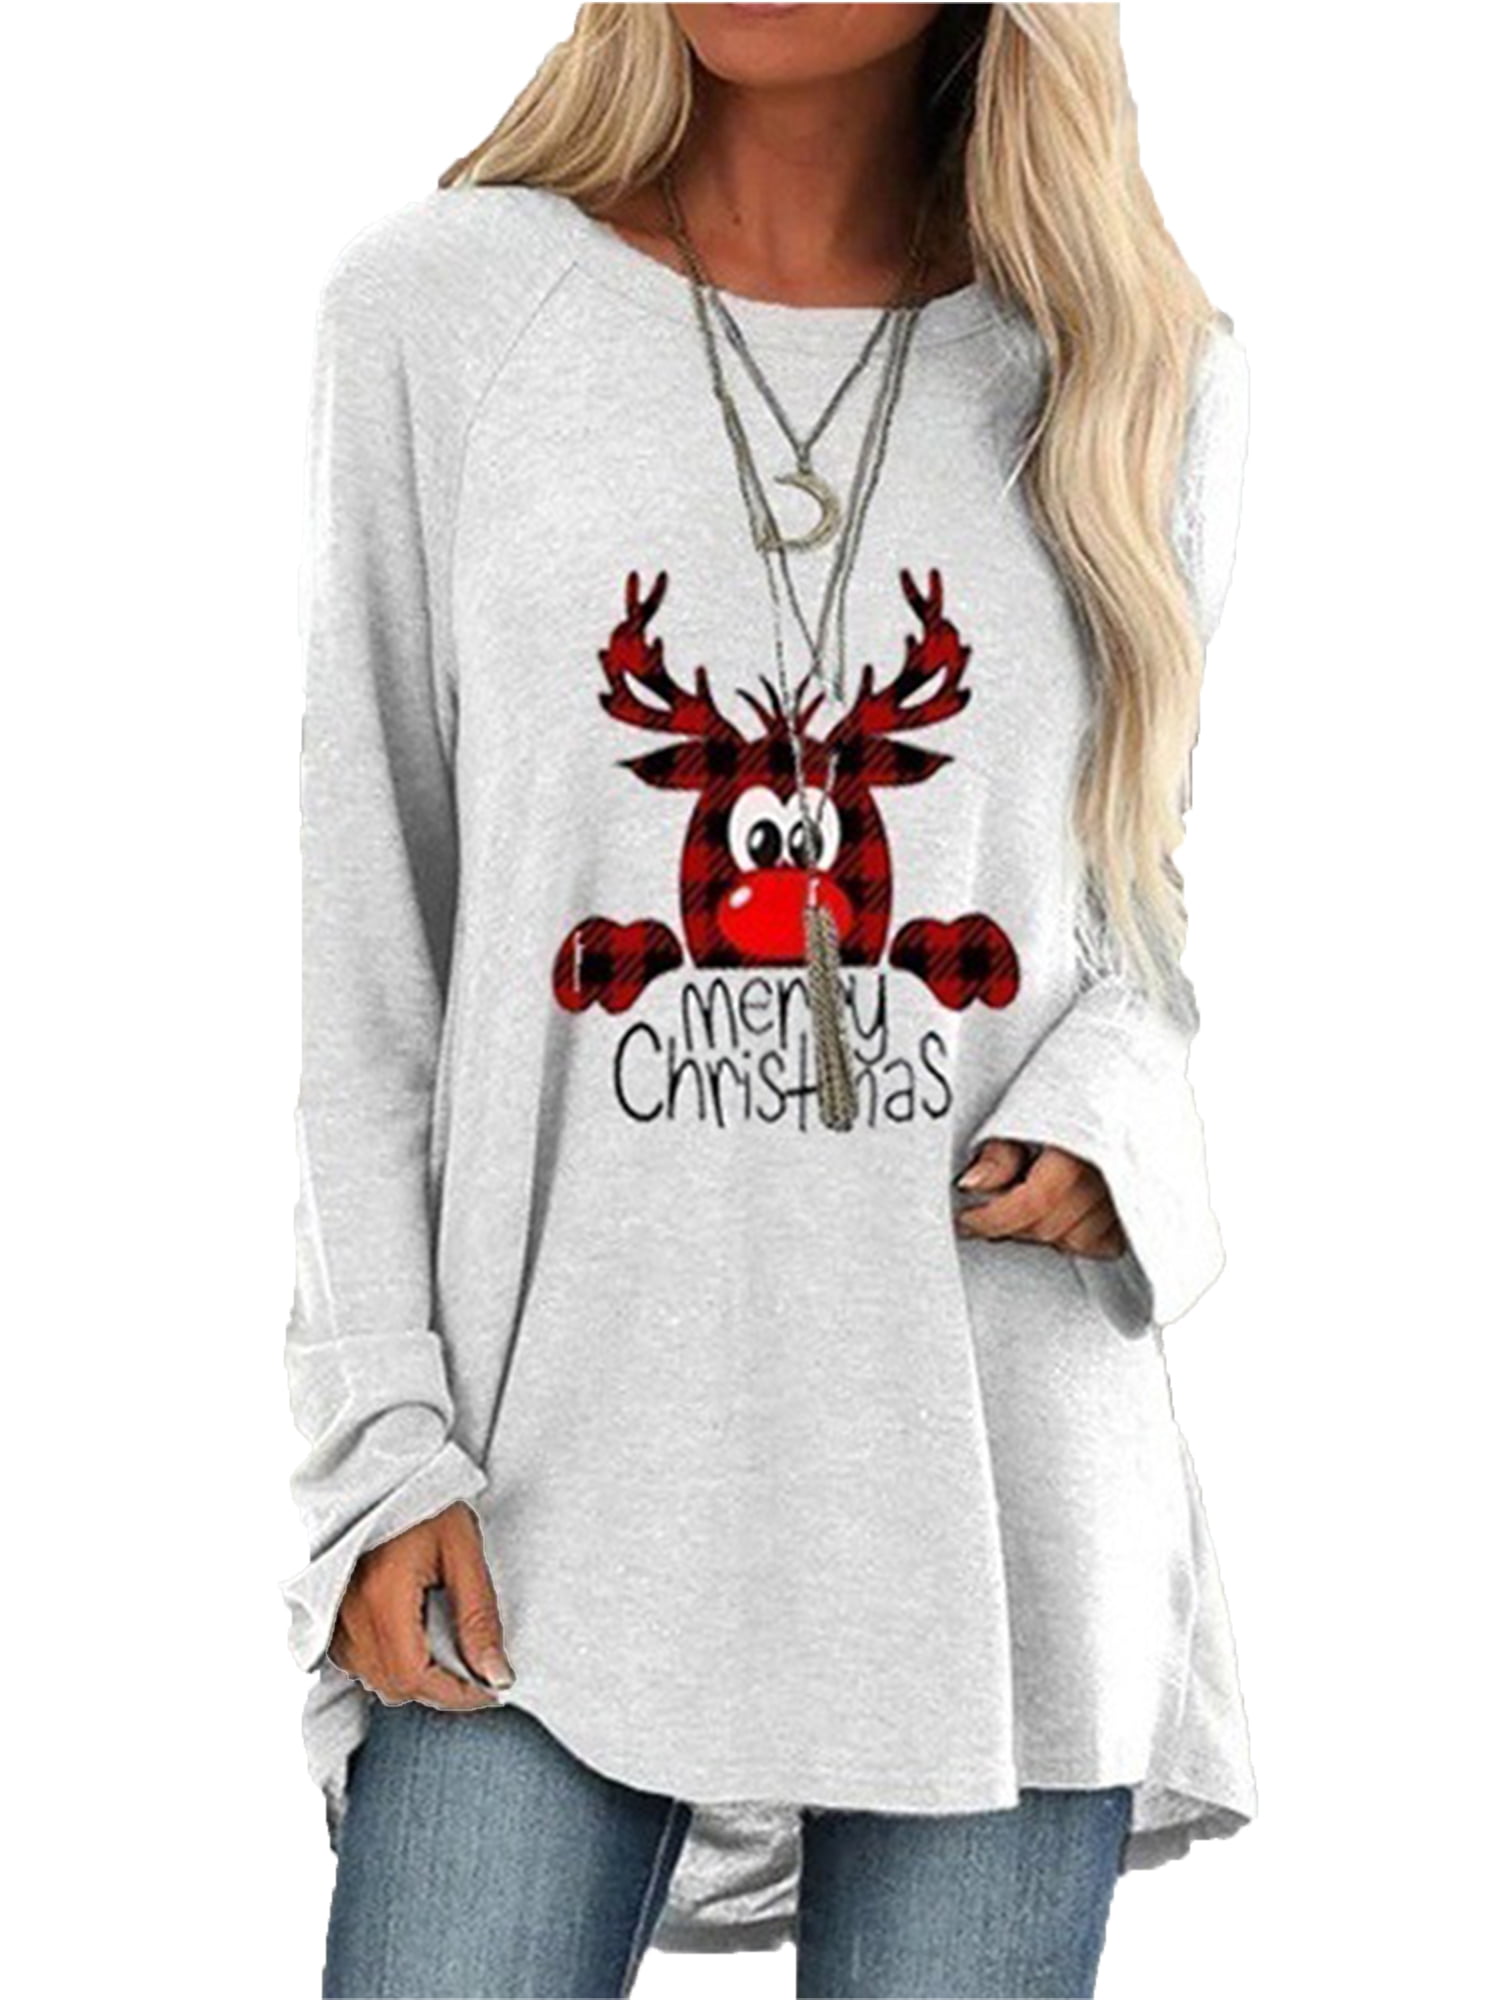 Long Tunics for Women to Wear with Leggings Long Sleeve Shirts Plaid Deer Merry Christmas Shirts Plus Size.S-3XL 